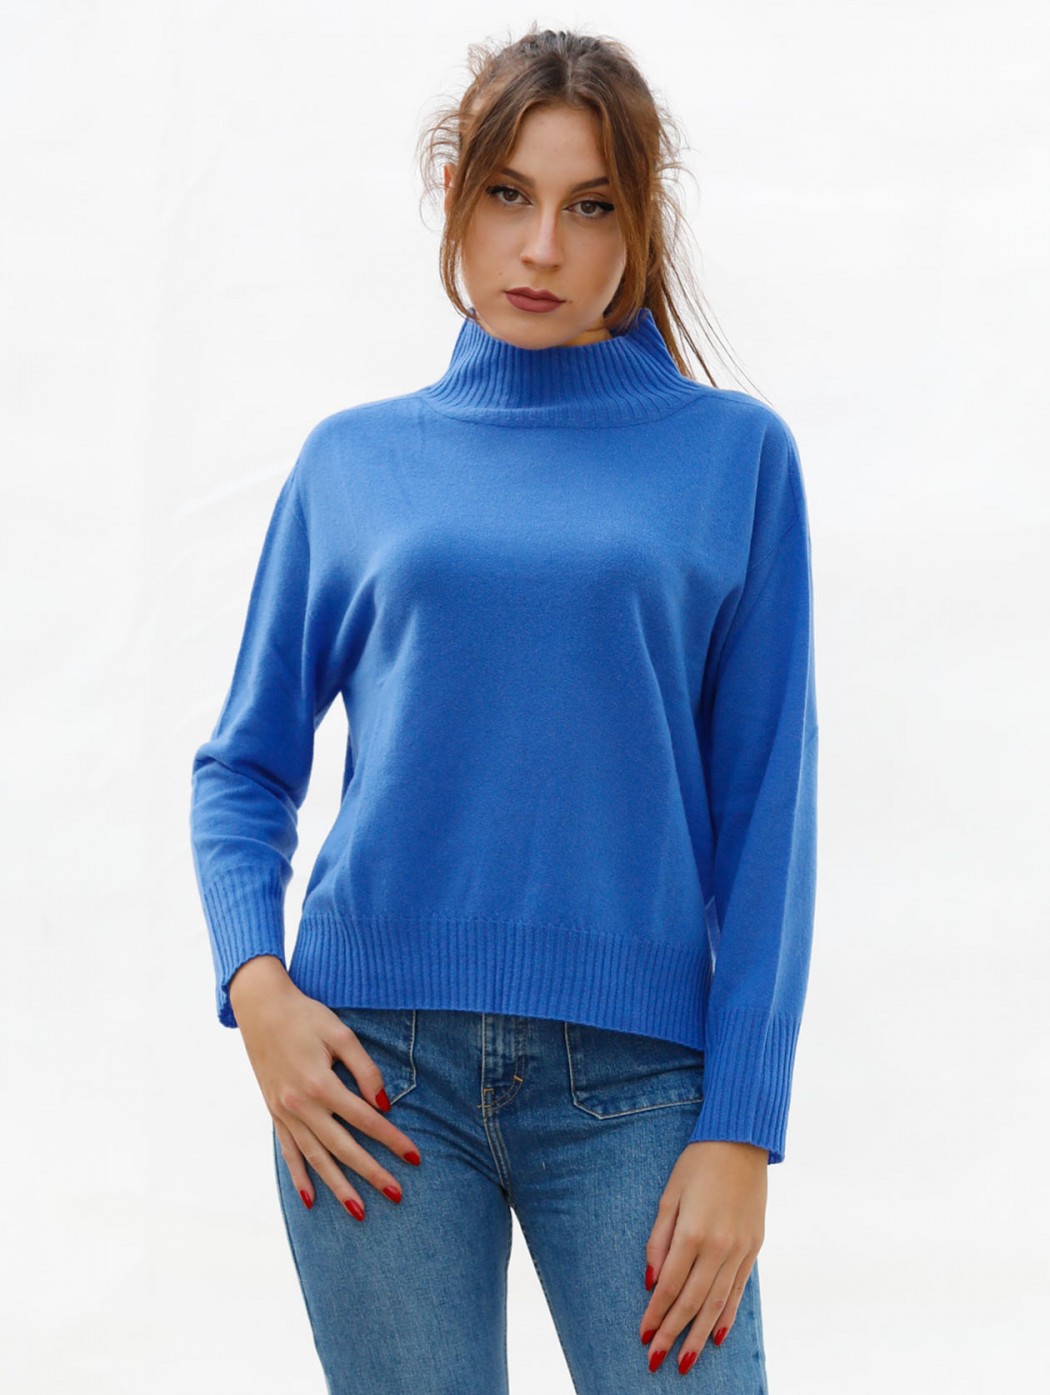 Riva Tricot blue cashmere wool turtleneck knitted box jumper sweater